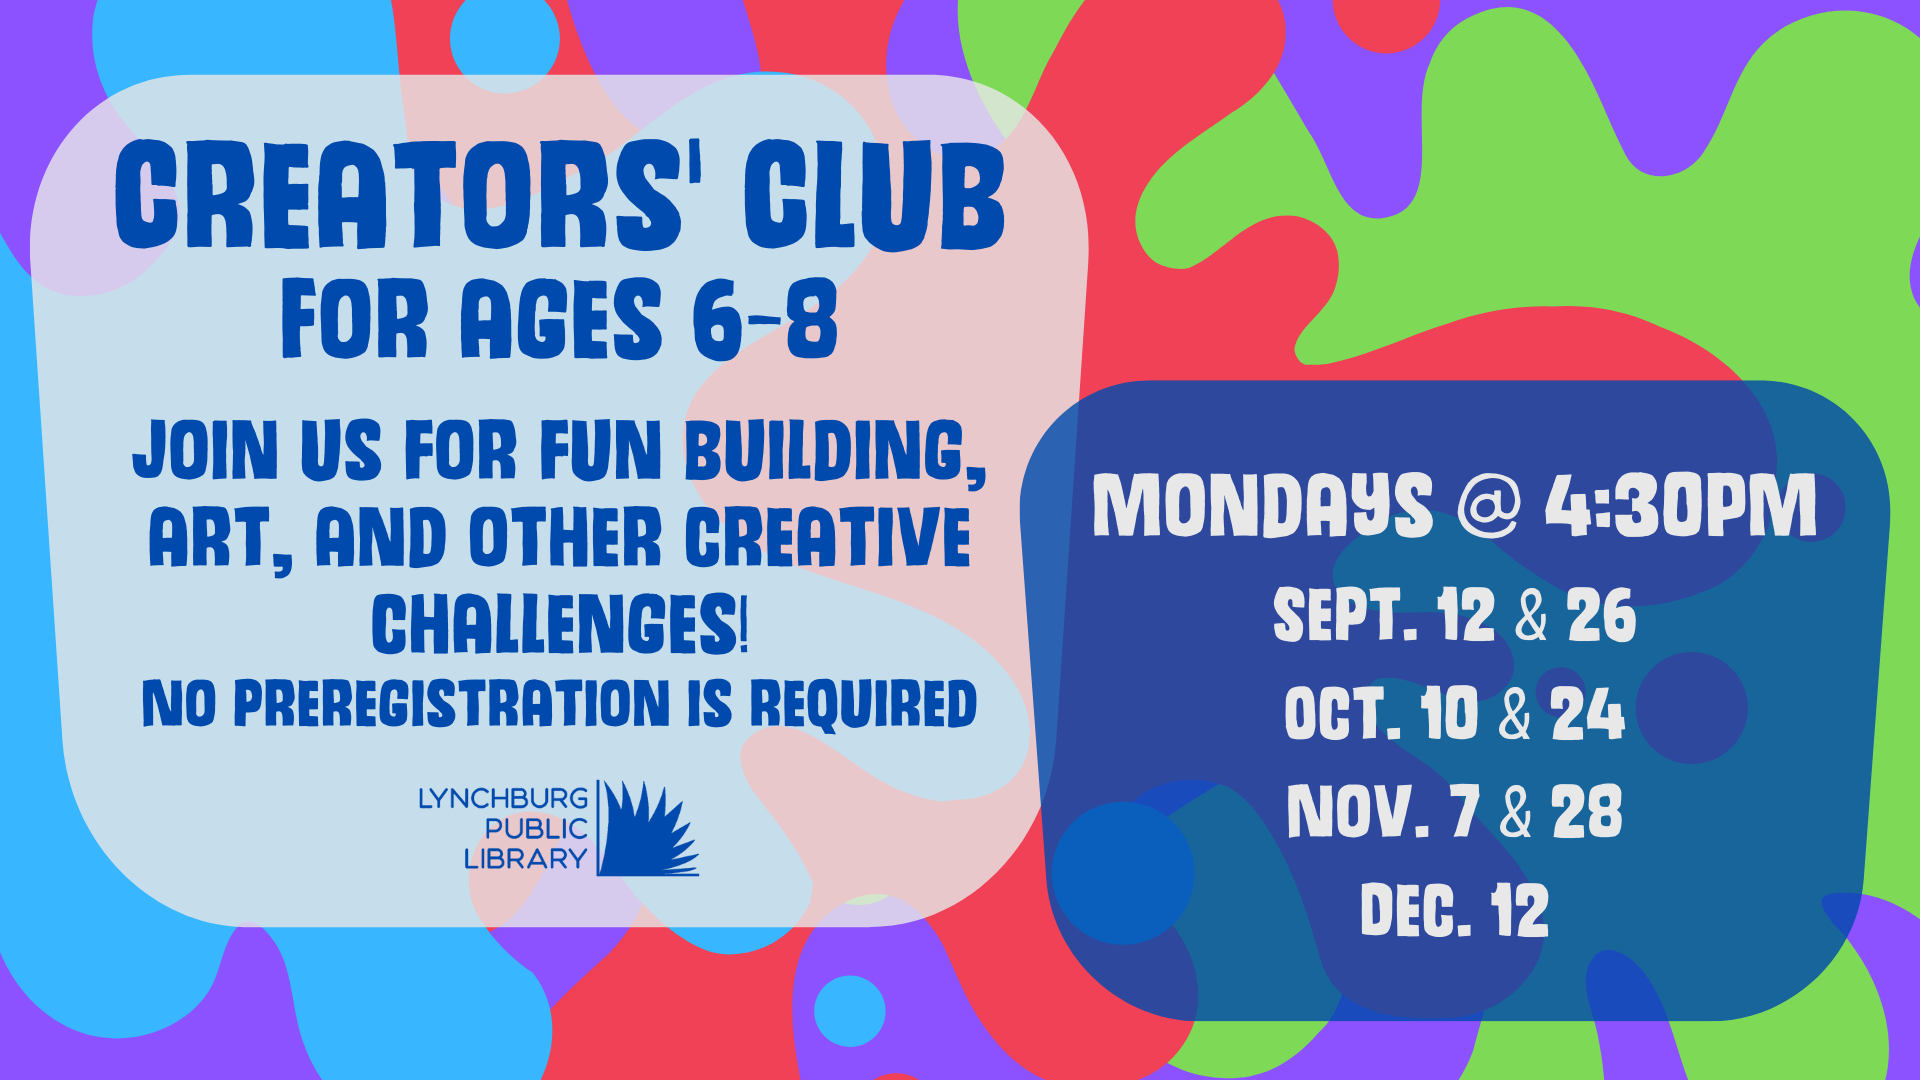 Creators' Club information with colorful splatters.